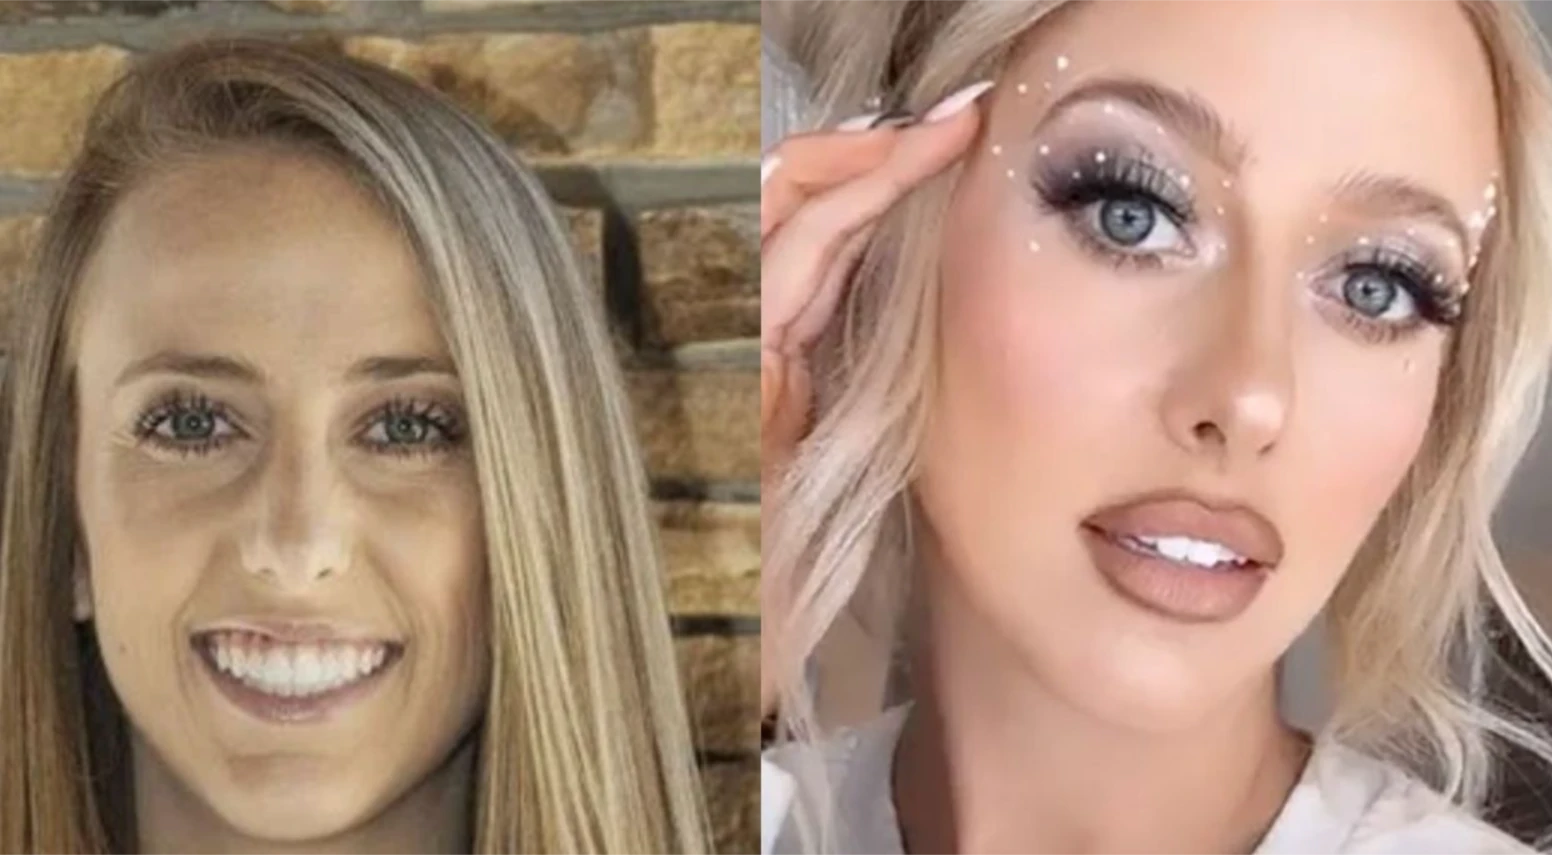 Has Brittany Mahomes Had Plastic Surgery? Rumors and Facts About